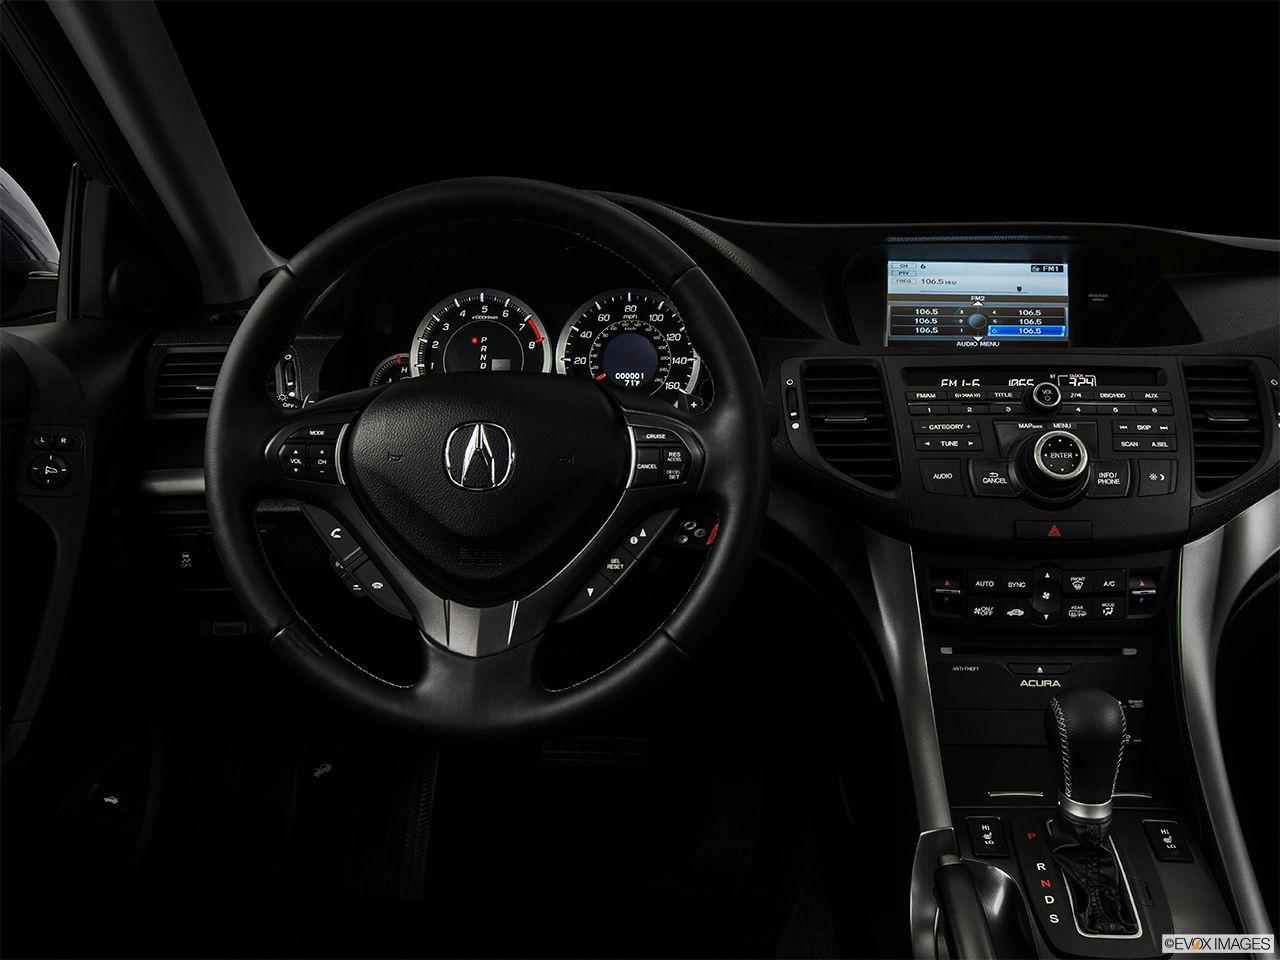 2014 Acura TSX 5-Speed Automatic Centered wide dash shot - "night" shot. 